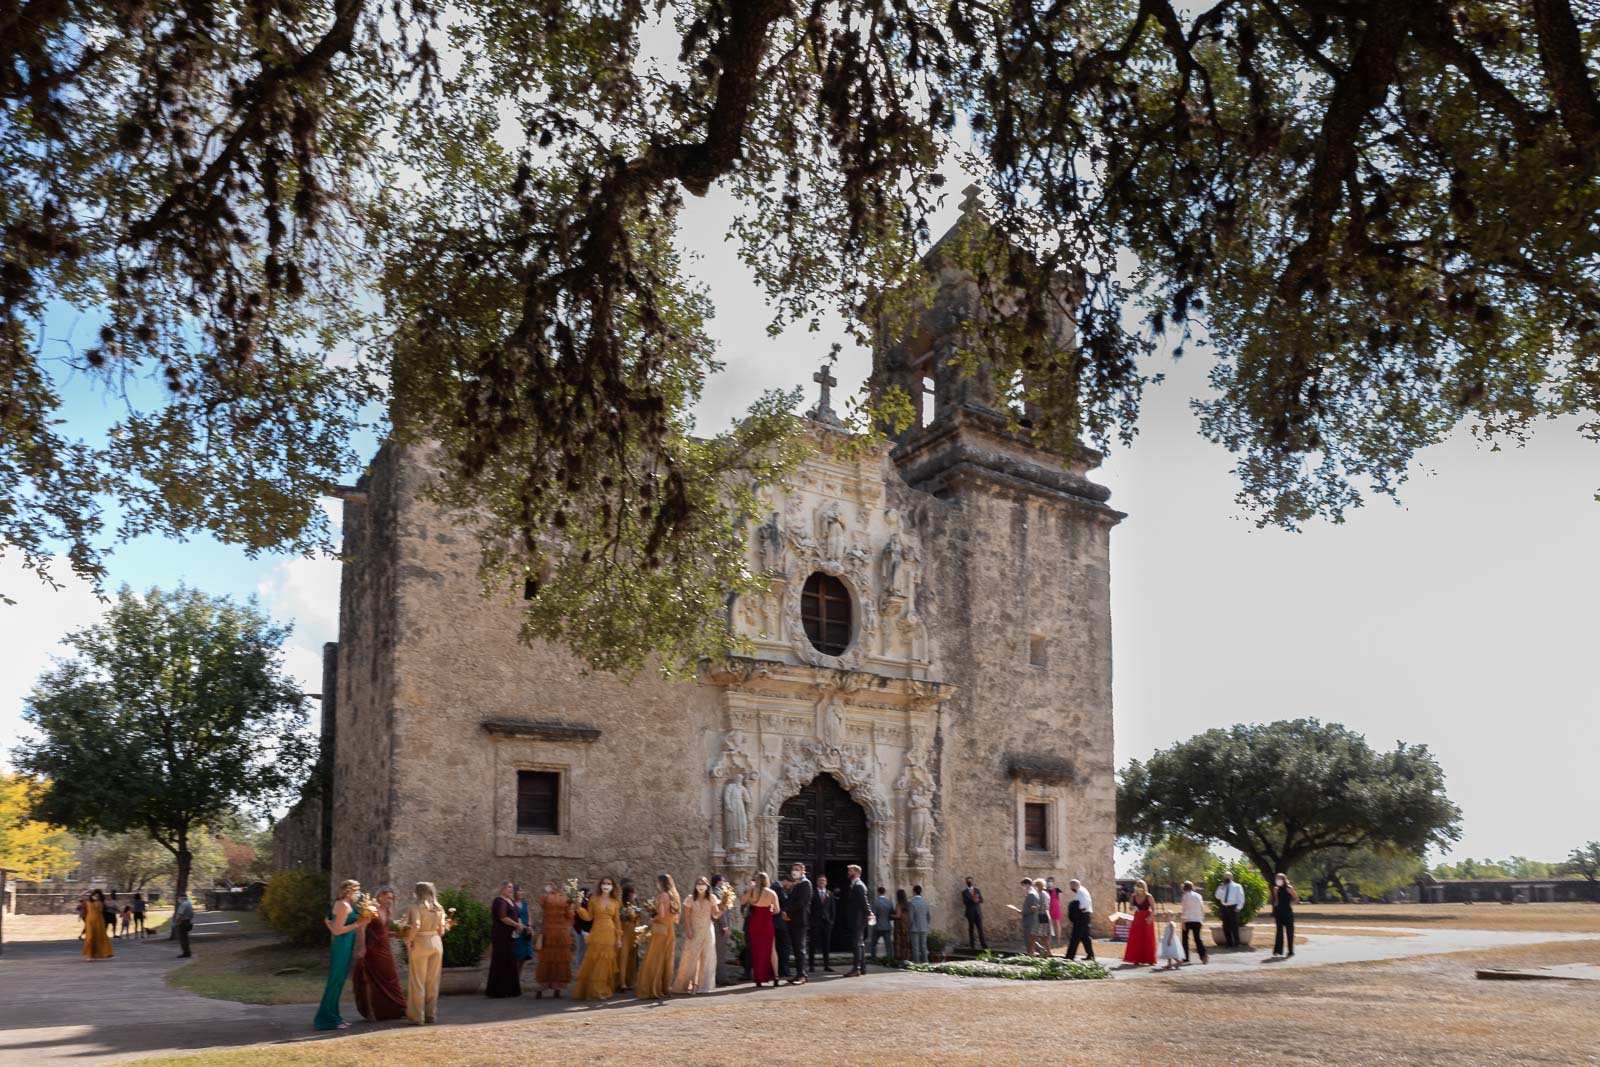 San Jose Missions show guests gathering before a wedding ceremony commences